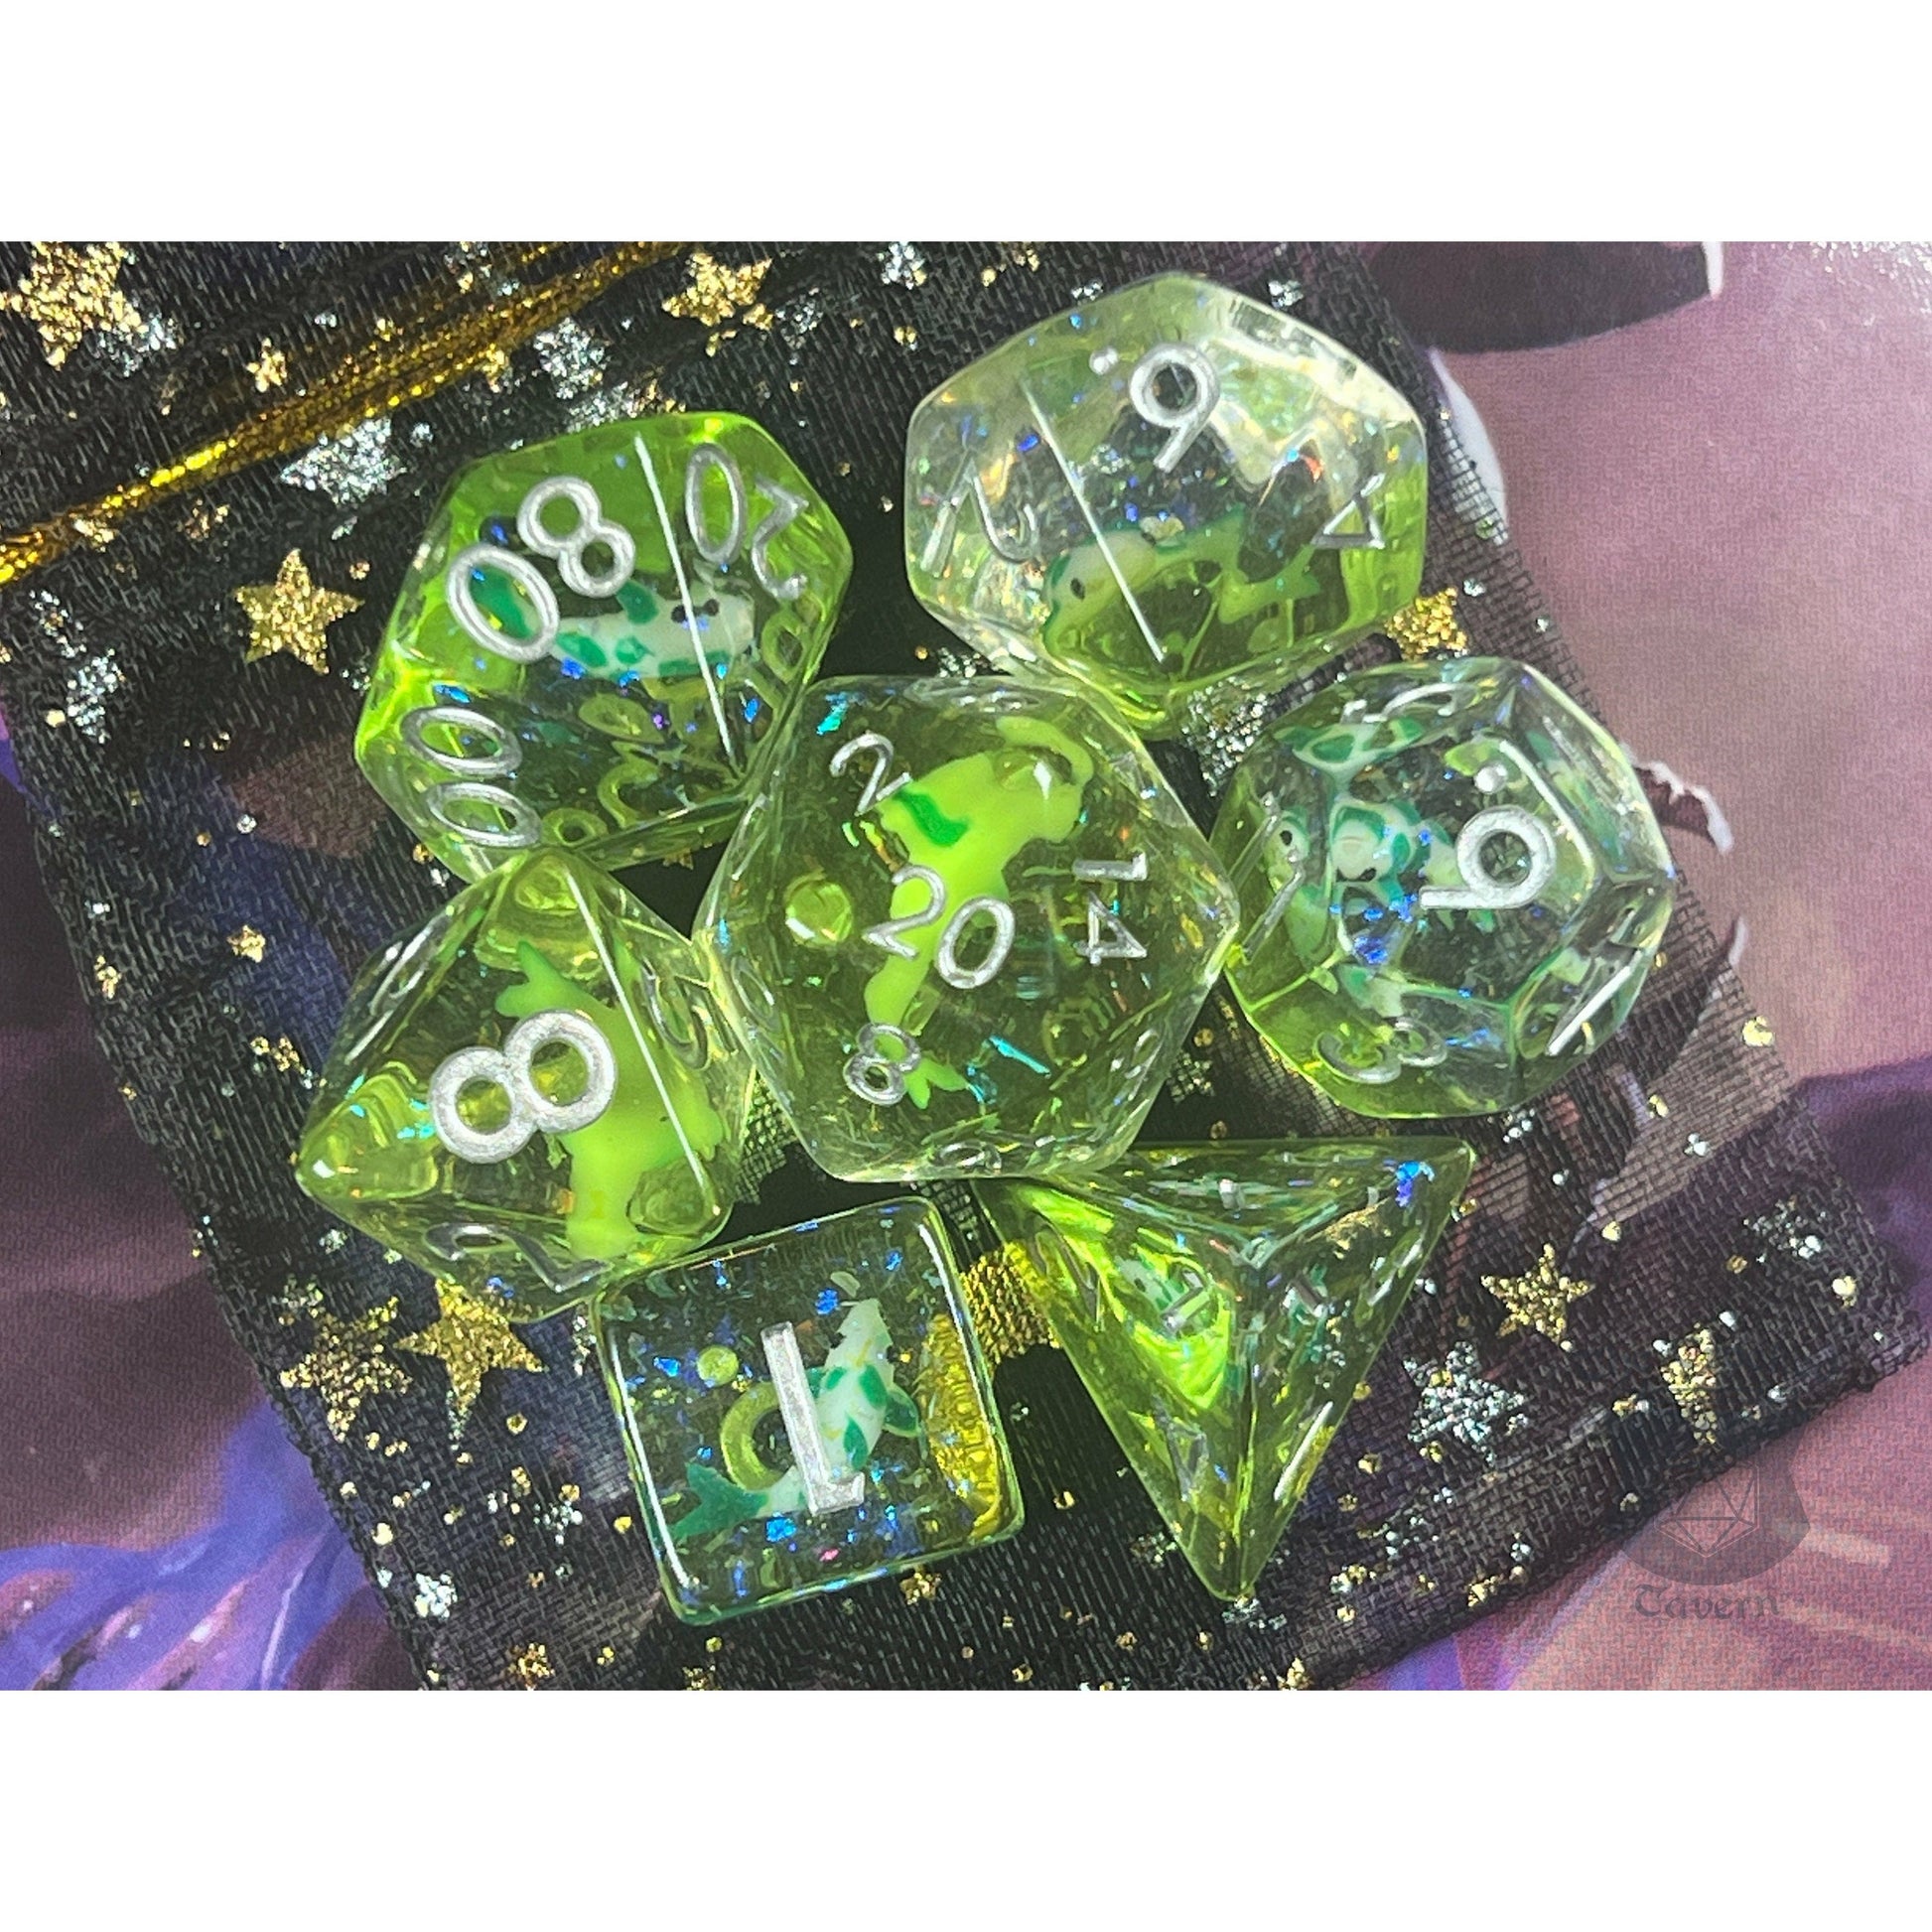 The Crooked Tavern Dice Sets Garden Koi Fish RPG Dice Set | Green and White Koi Fish Inside!